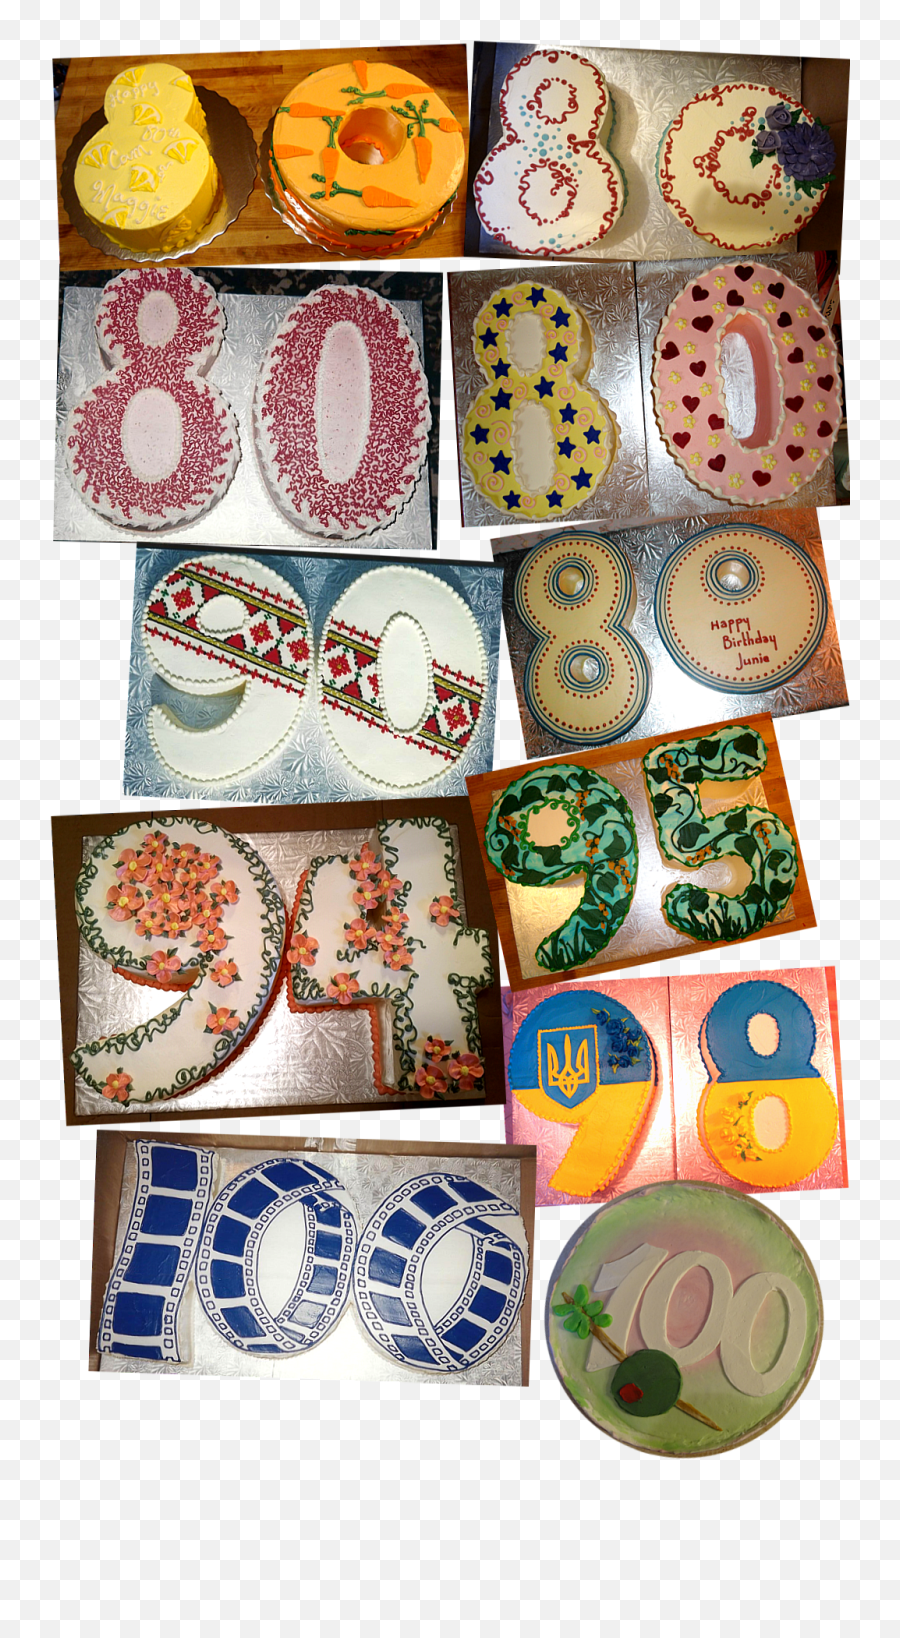 The Cake Lady Kitchen - Portfolio Of Cakes Numbers Emoji,Emoji With Letters